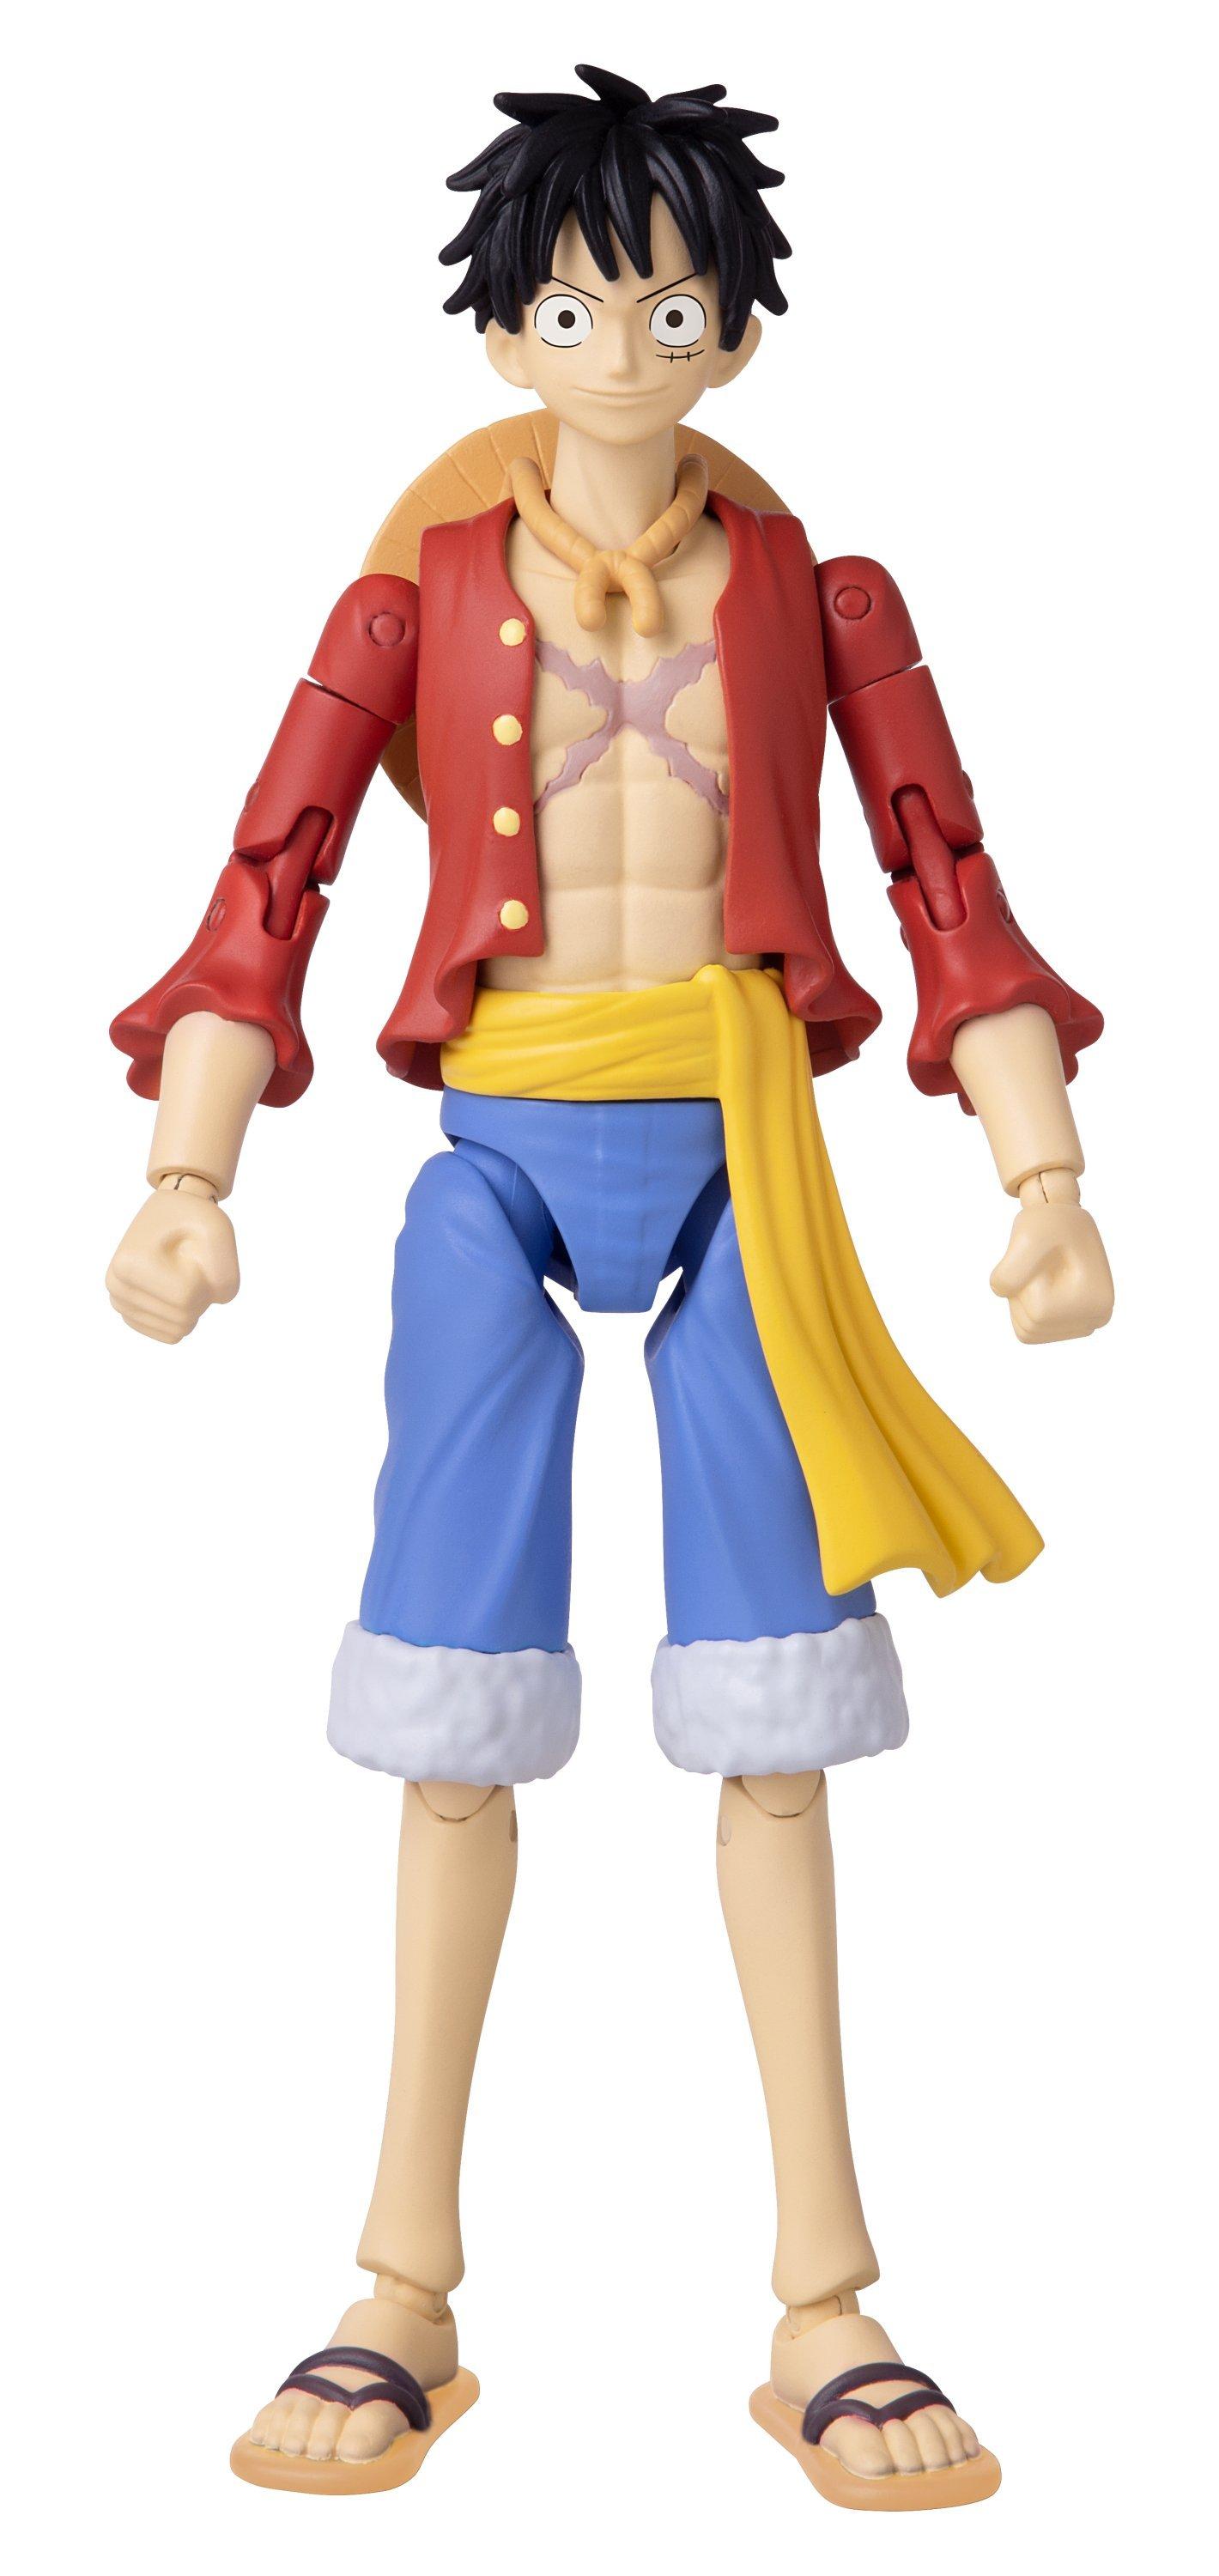 Bandai One Piece Luffy Anime Heroes 6 5 In Action Figure Gamestop